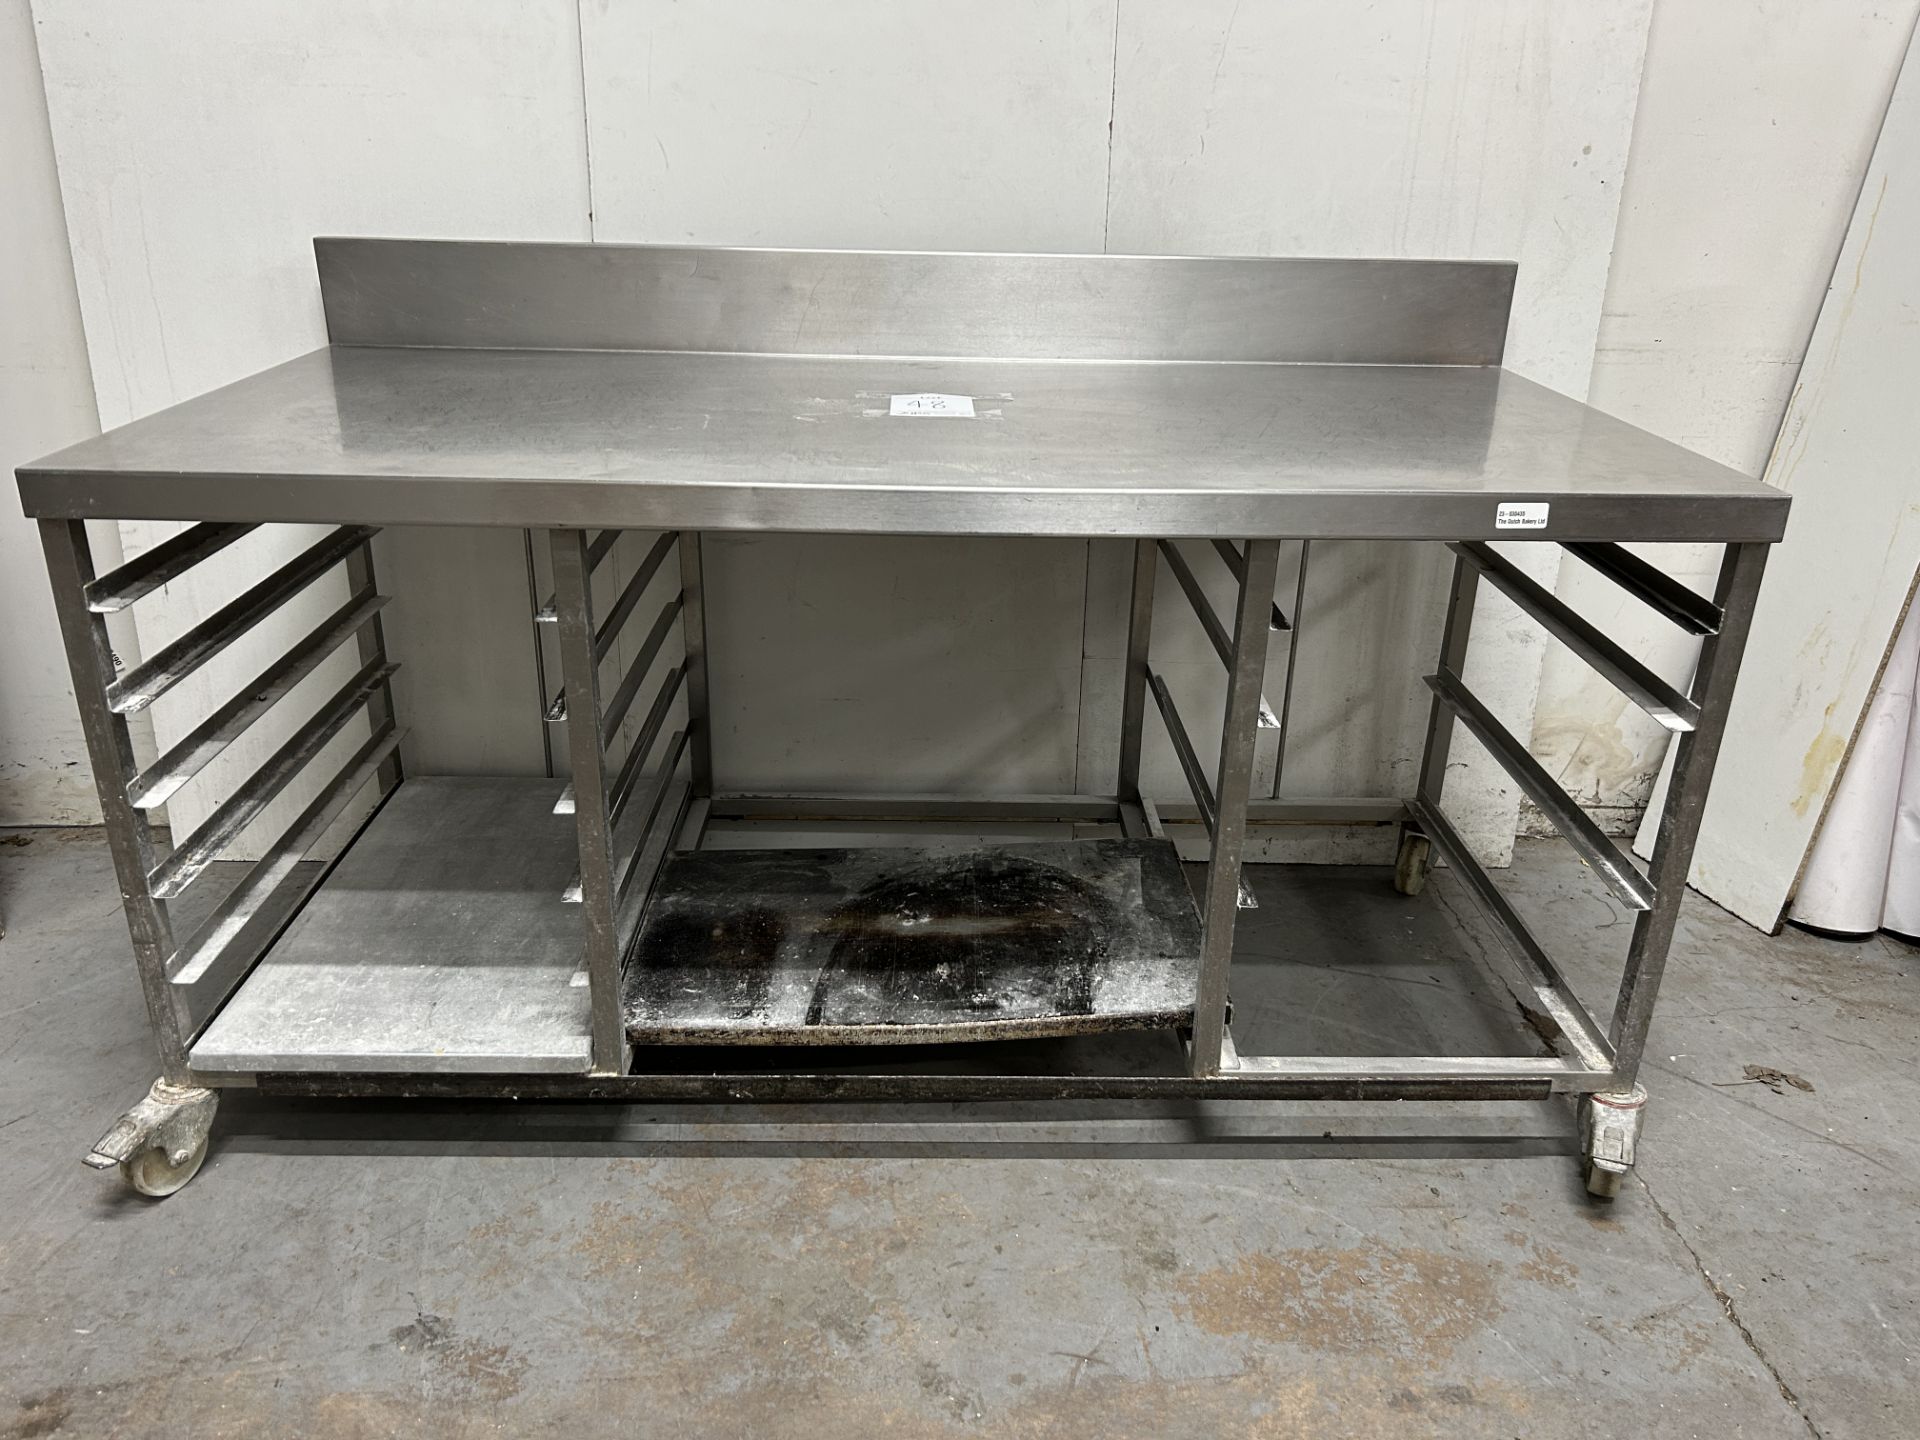 Stainless Steel Steel Mobile Preparation Table w/ Tray Shelves | 176cm x 80cm x 101cm | LOCATED IN W